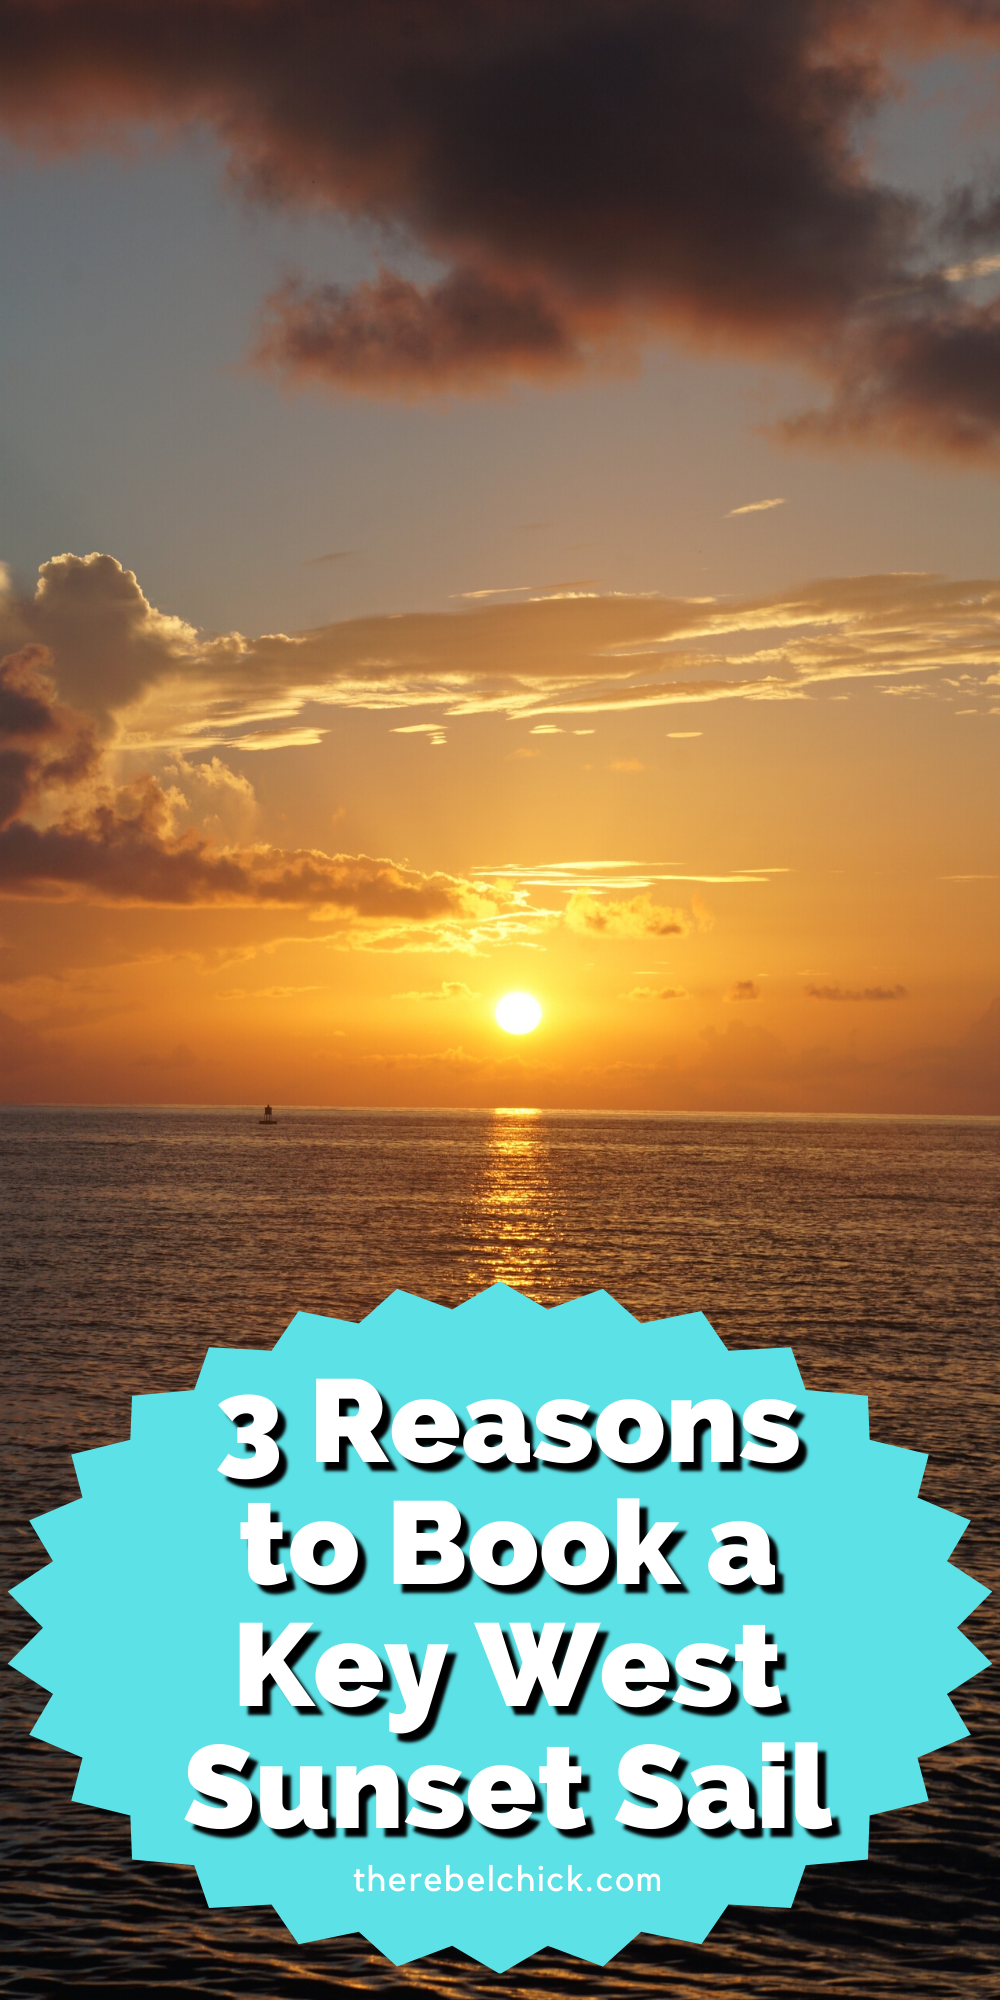 3 Reasons to Book a Key West Sunset Sail